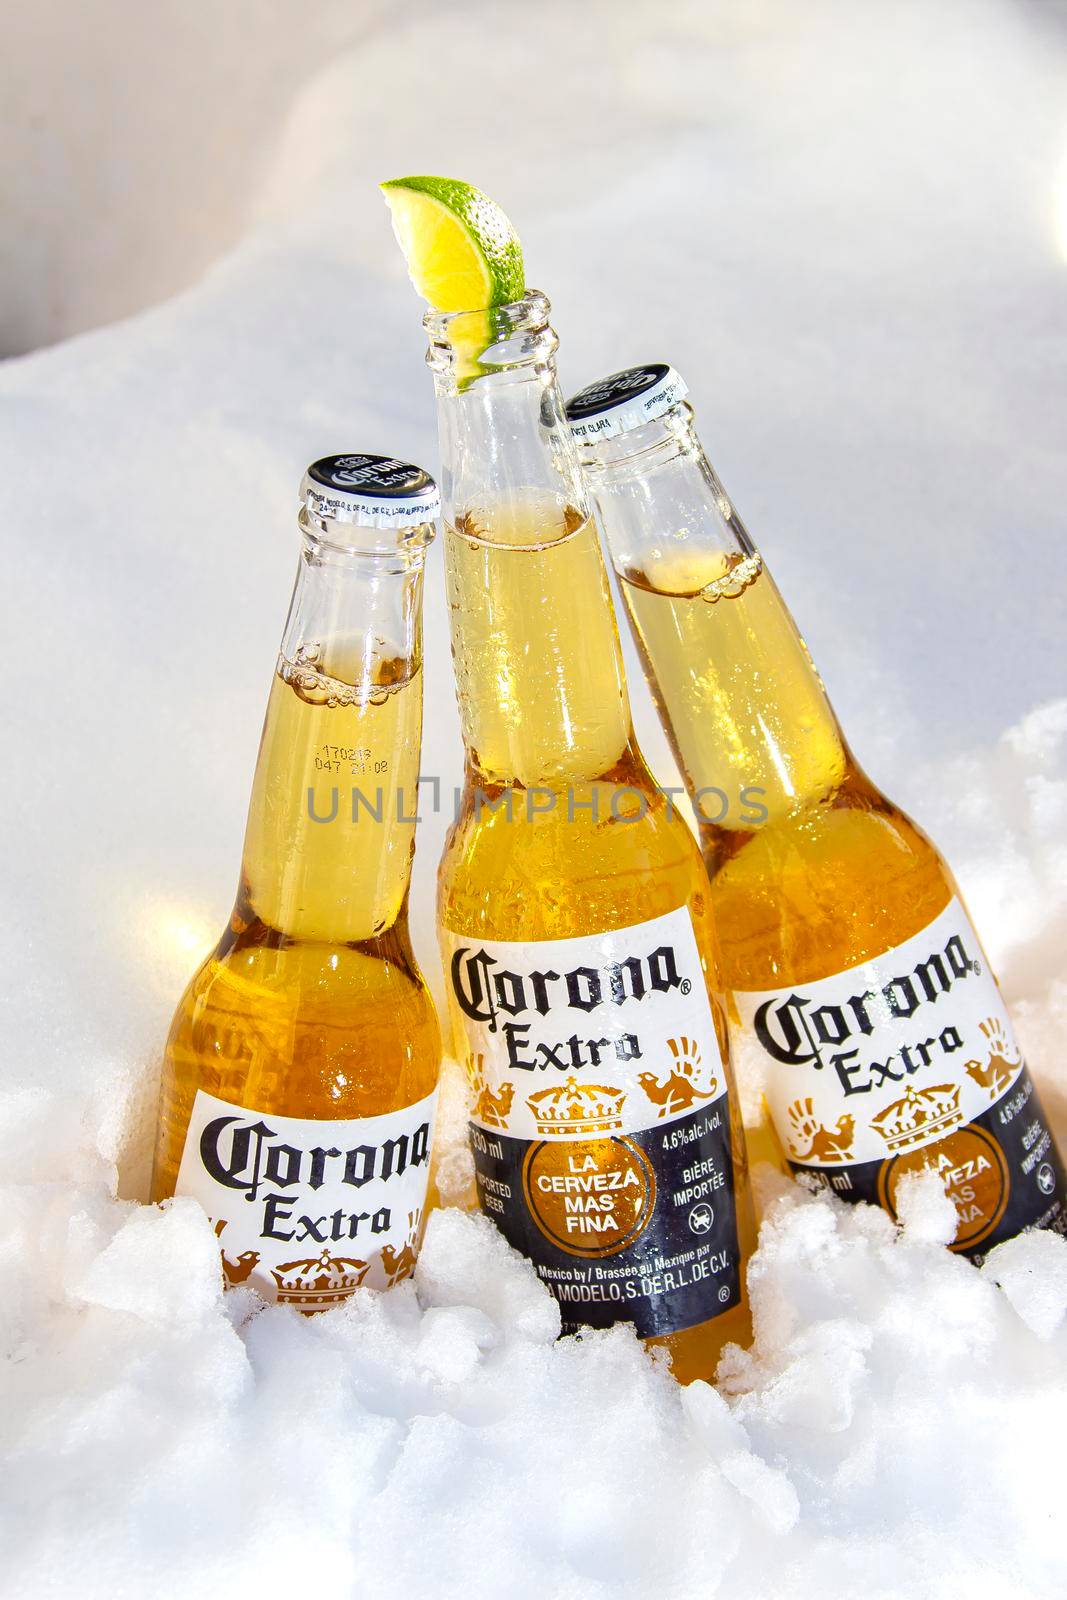 Calgary AB, Canada. October 1, 2019. three Corona beer bottles with lime on ice snow, full view.